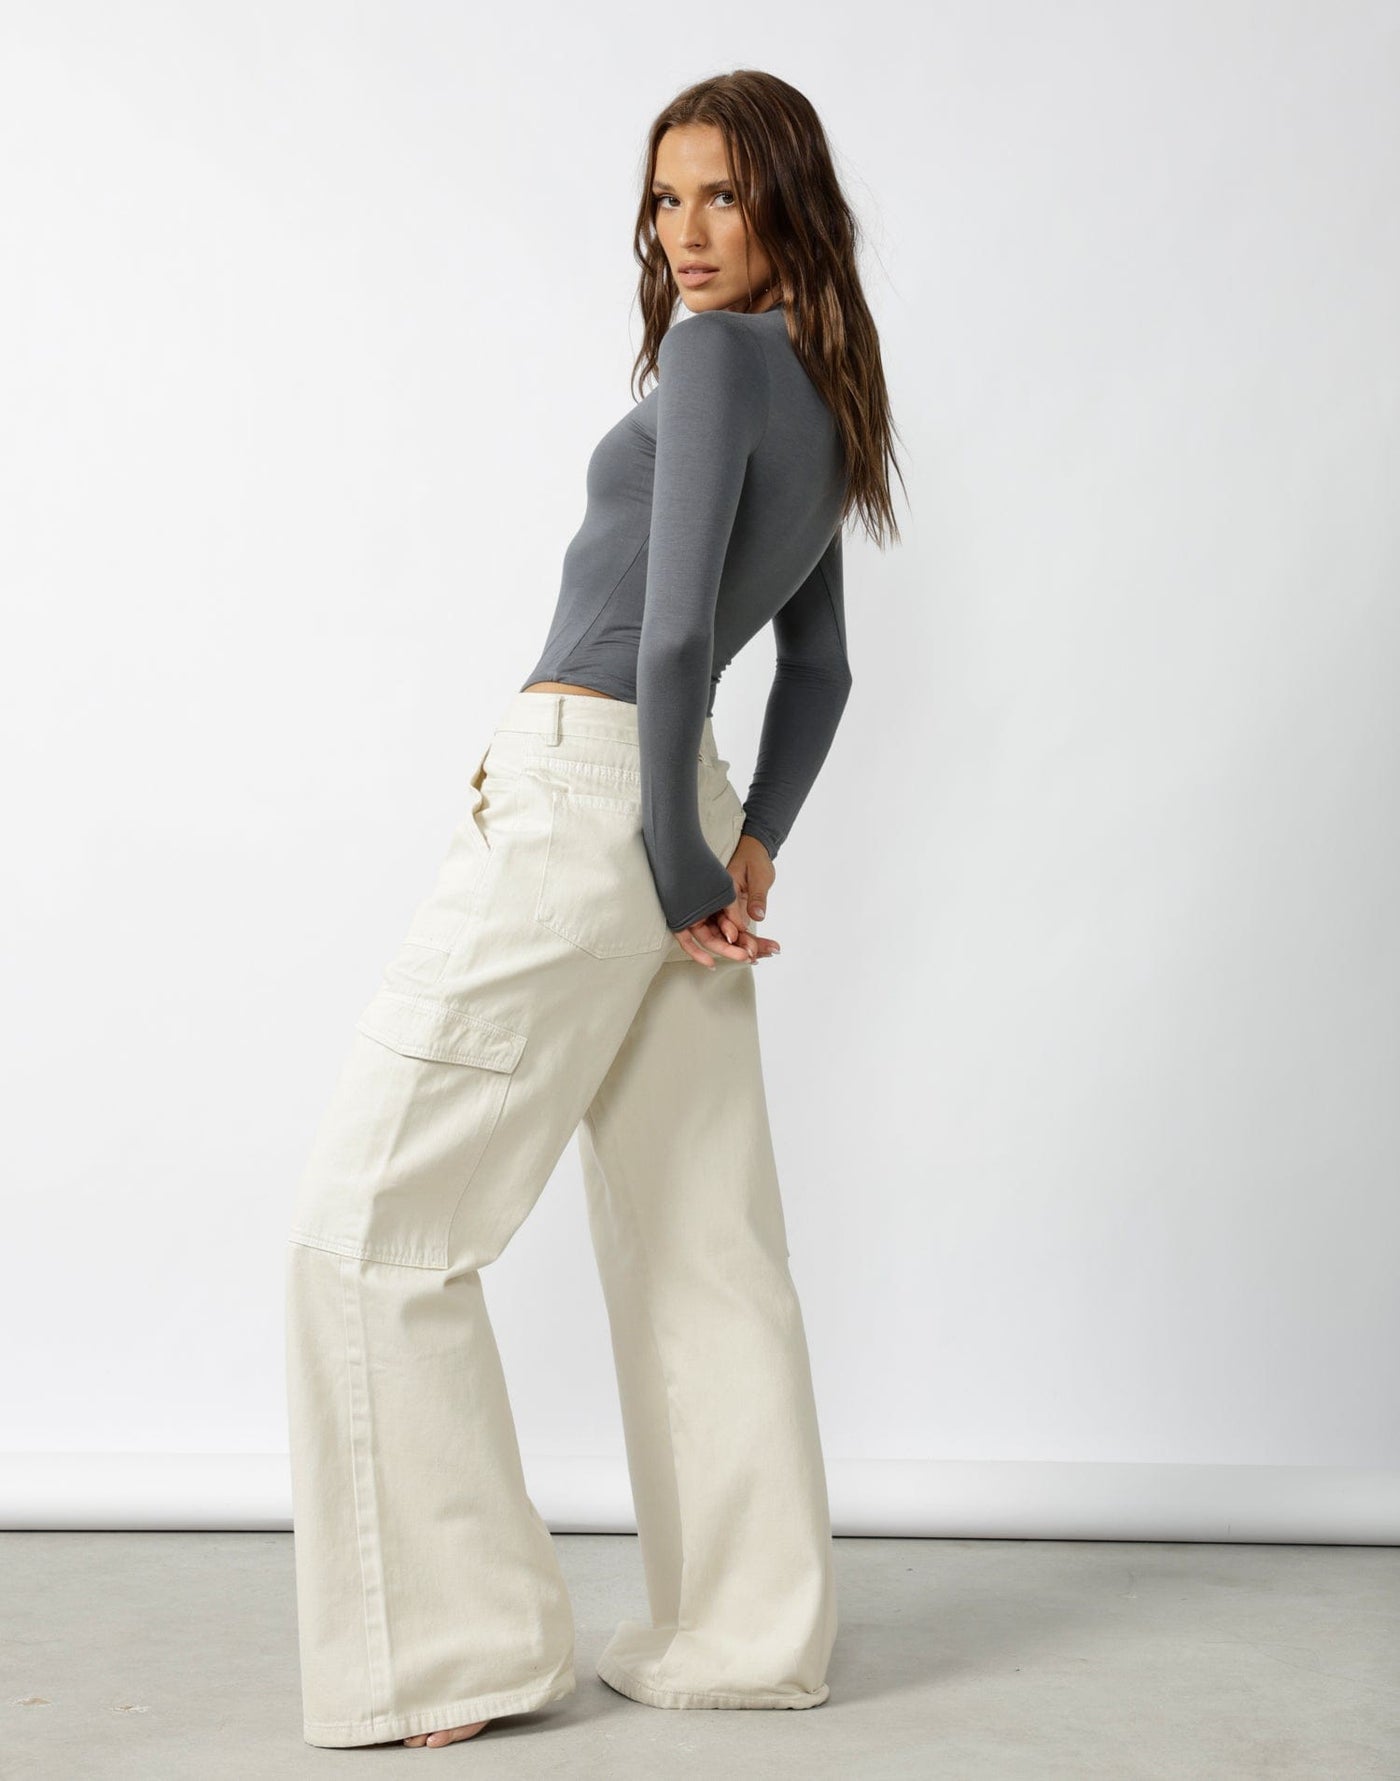 Adrian Cargo Jeans (Pumice) - Cream Cargo Jeans - Women's Pants - Charcoal Clothing